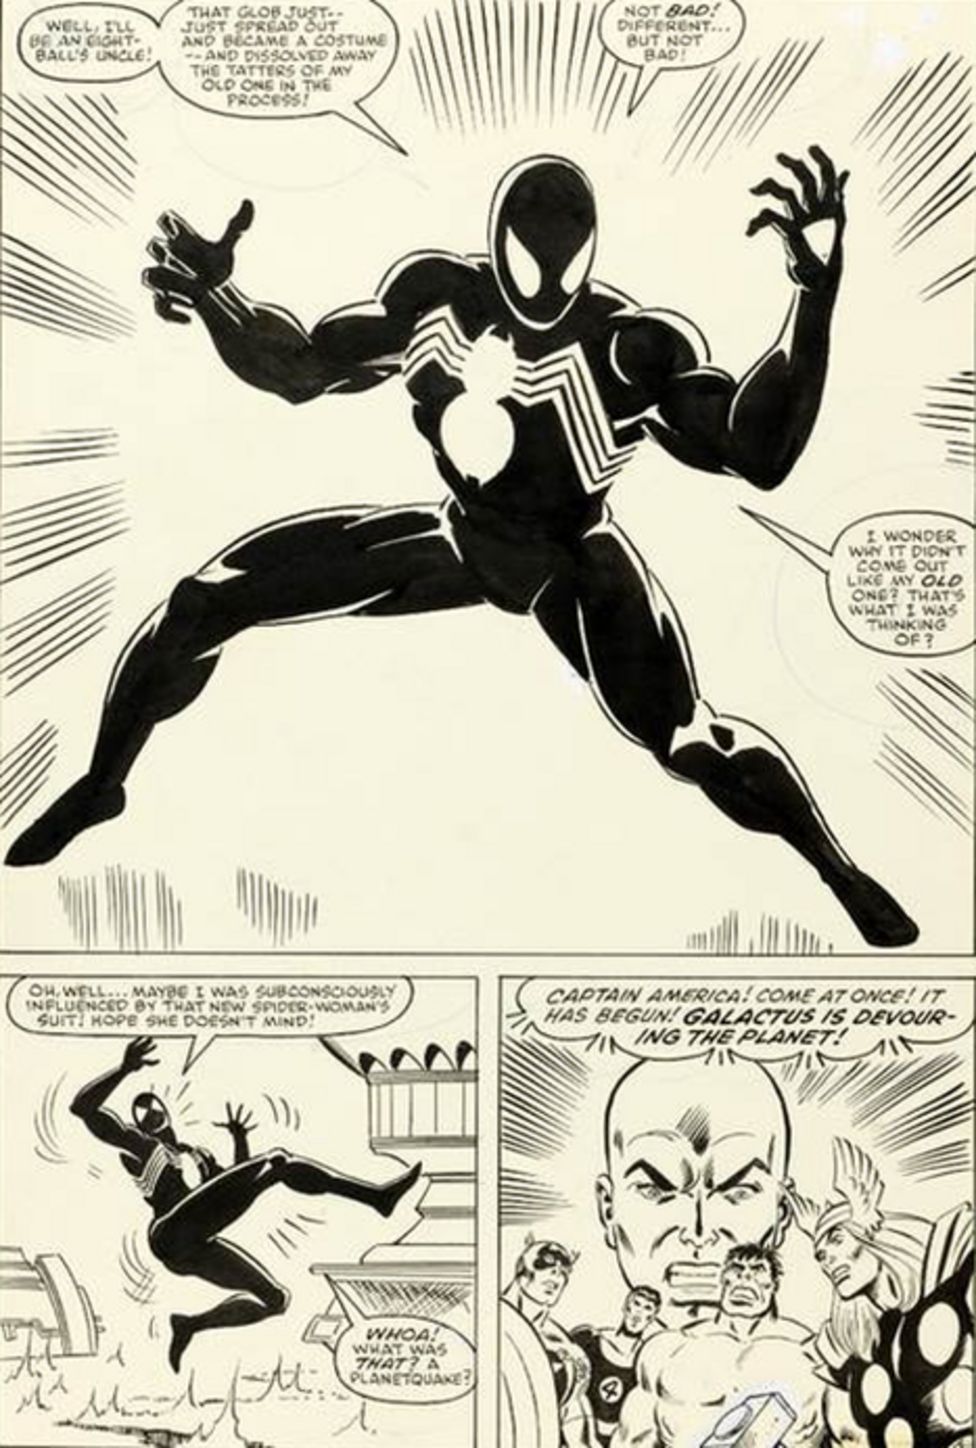 spider-man-comic-page-sold